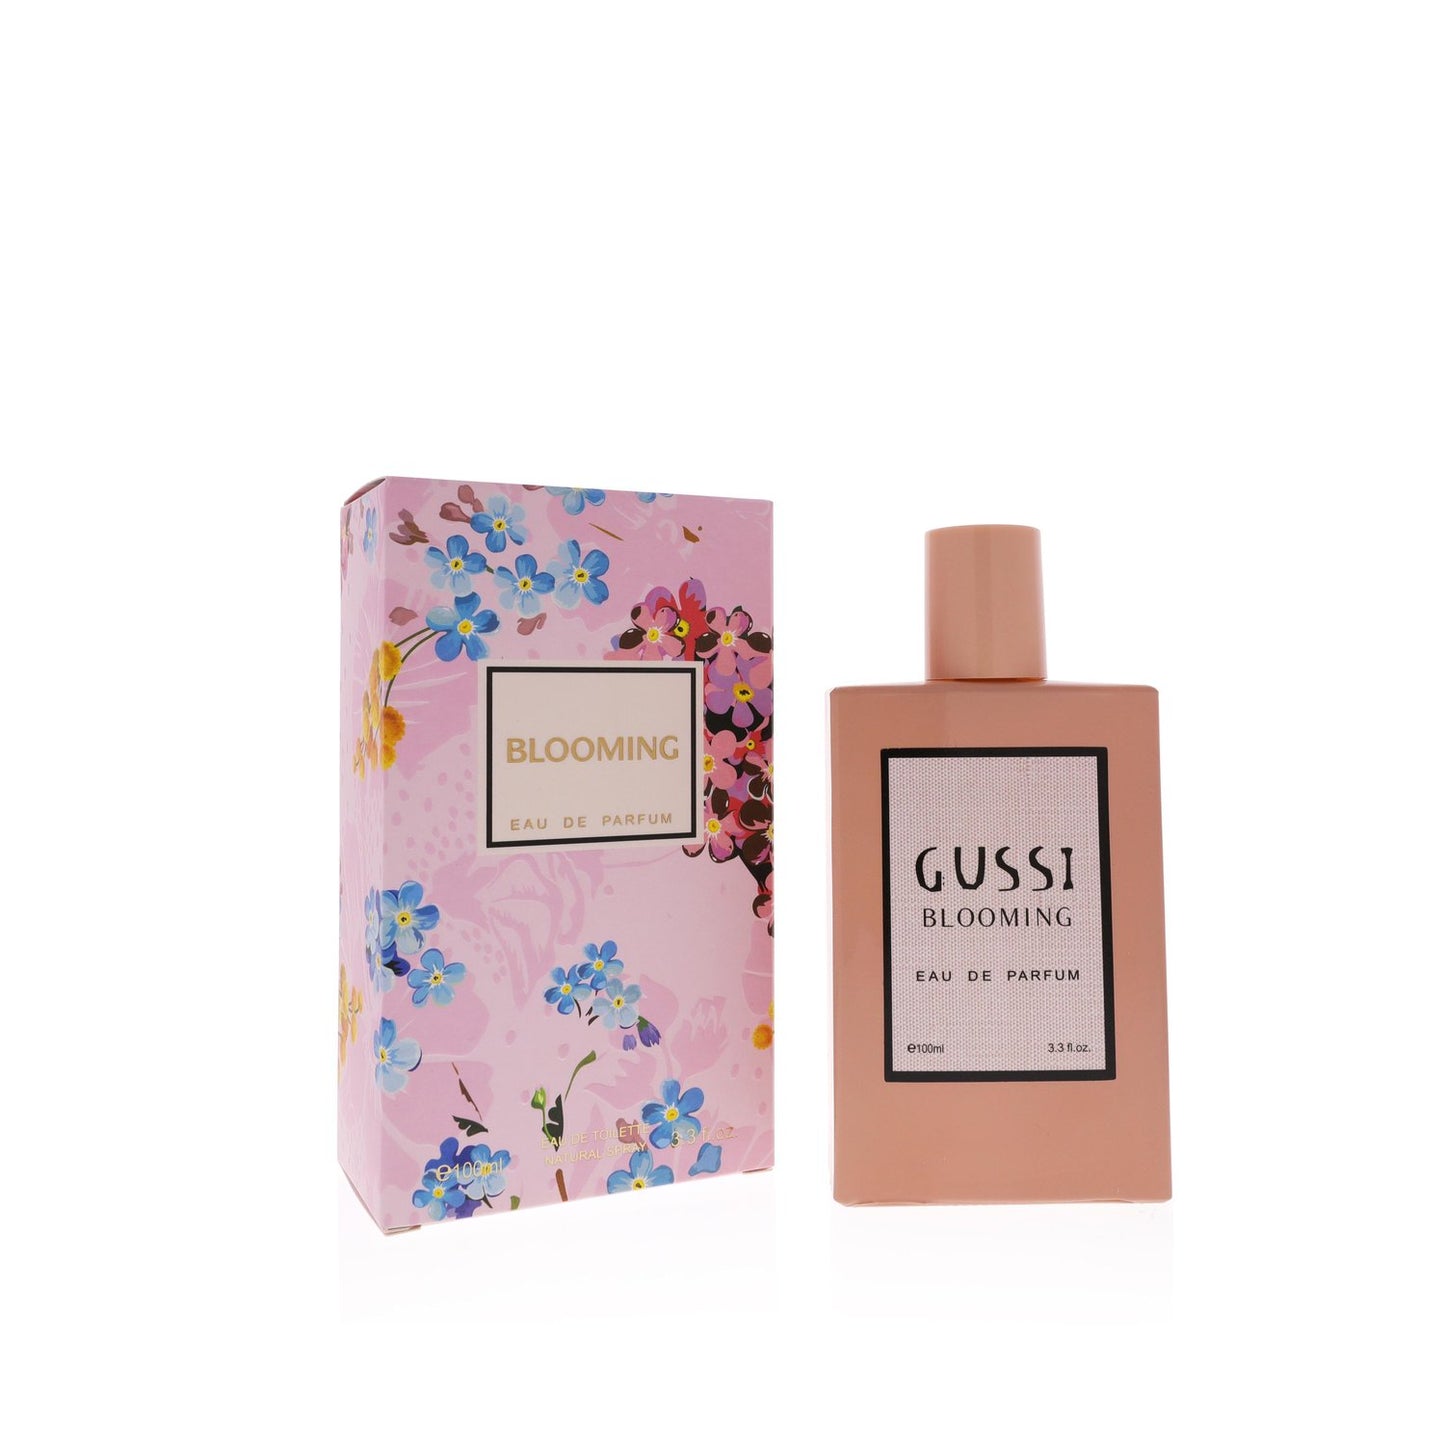 Gussi Blooming Women's Fragrance: Immerse Yourself in a Blossoming Symphony of Captivating Scents - A Perfect Floral Elixir for the Modern Woman's Signature Collection!